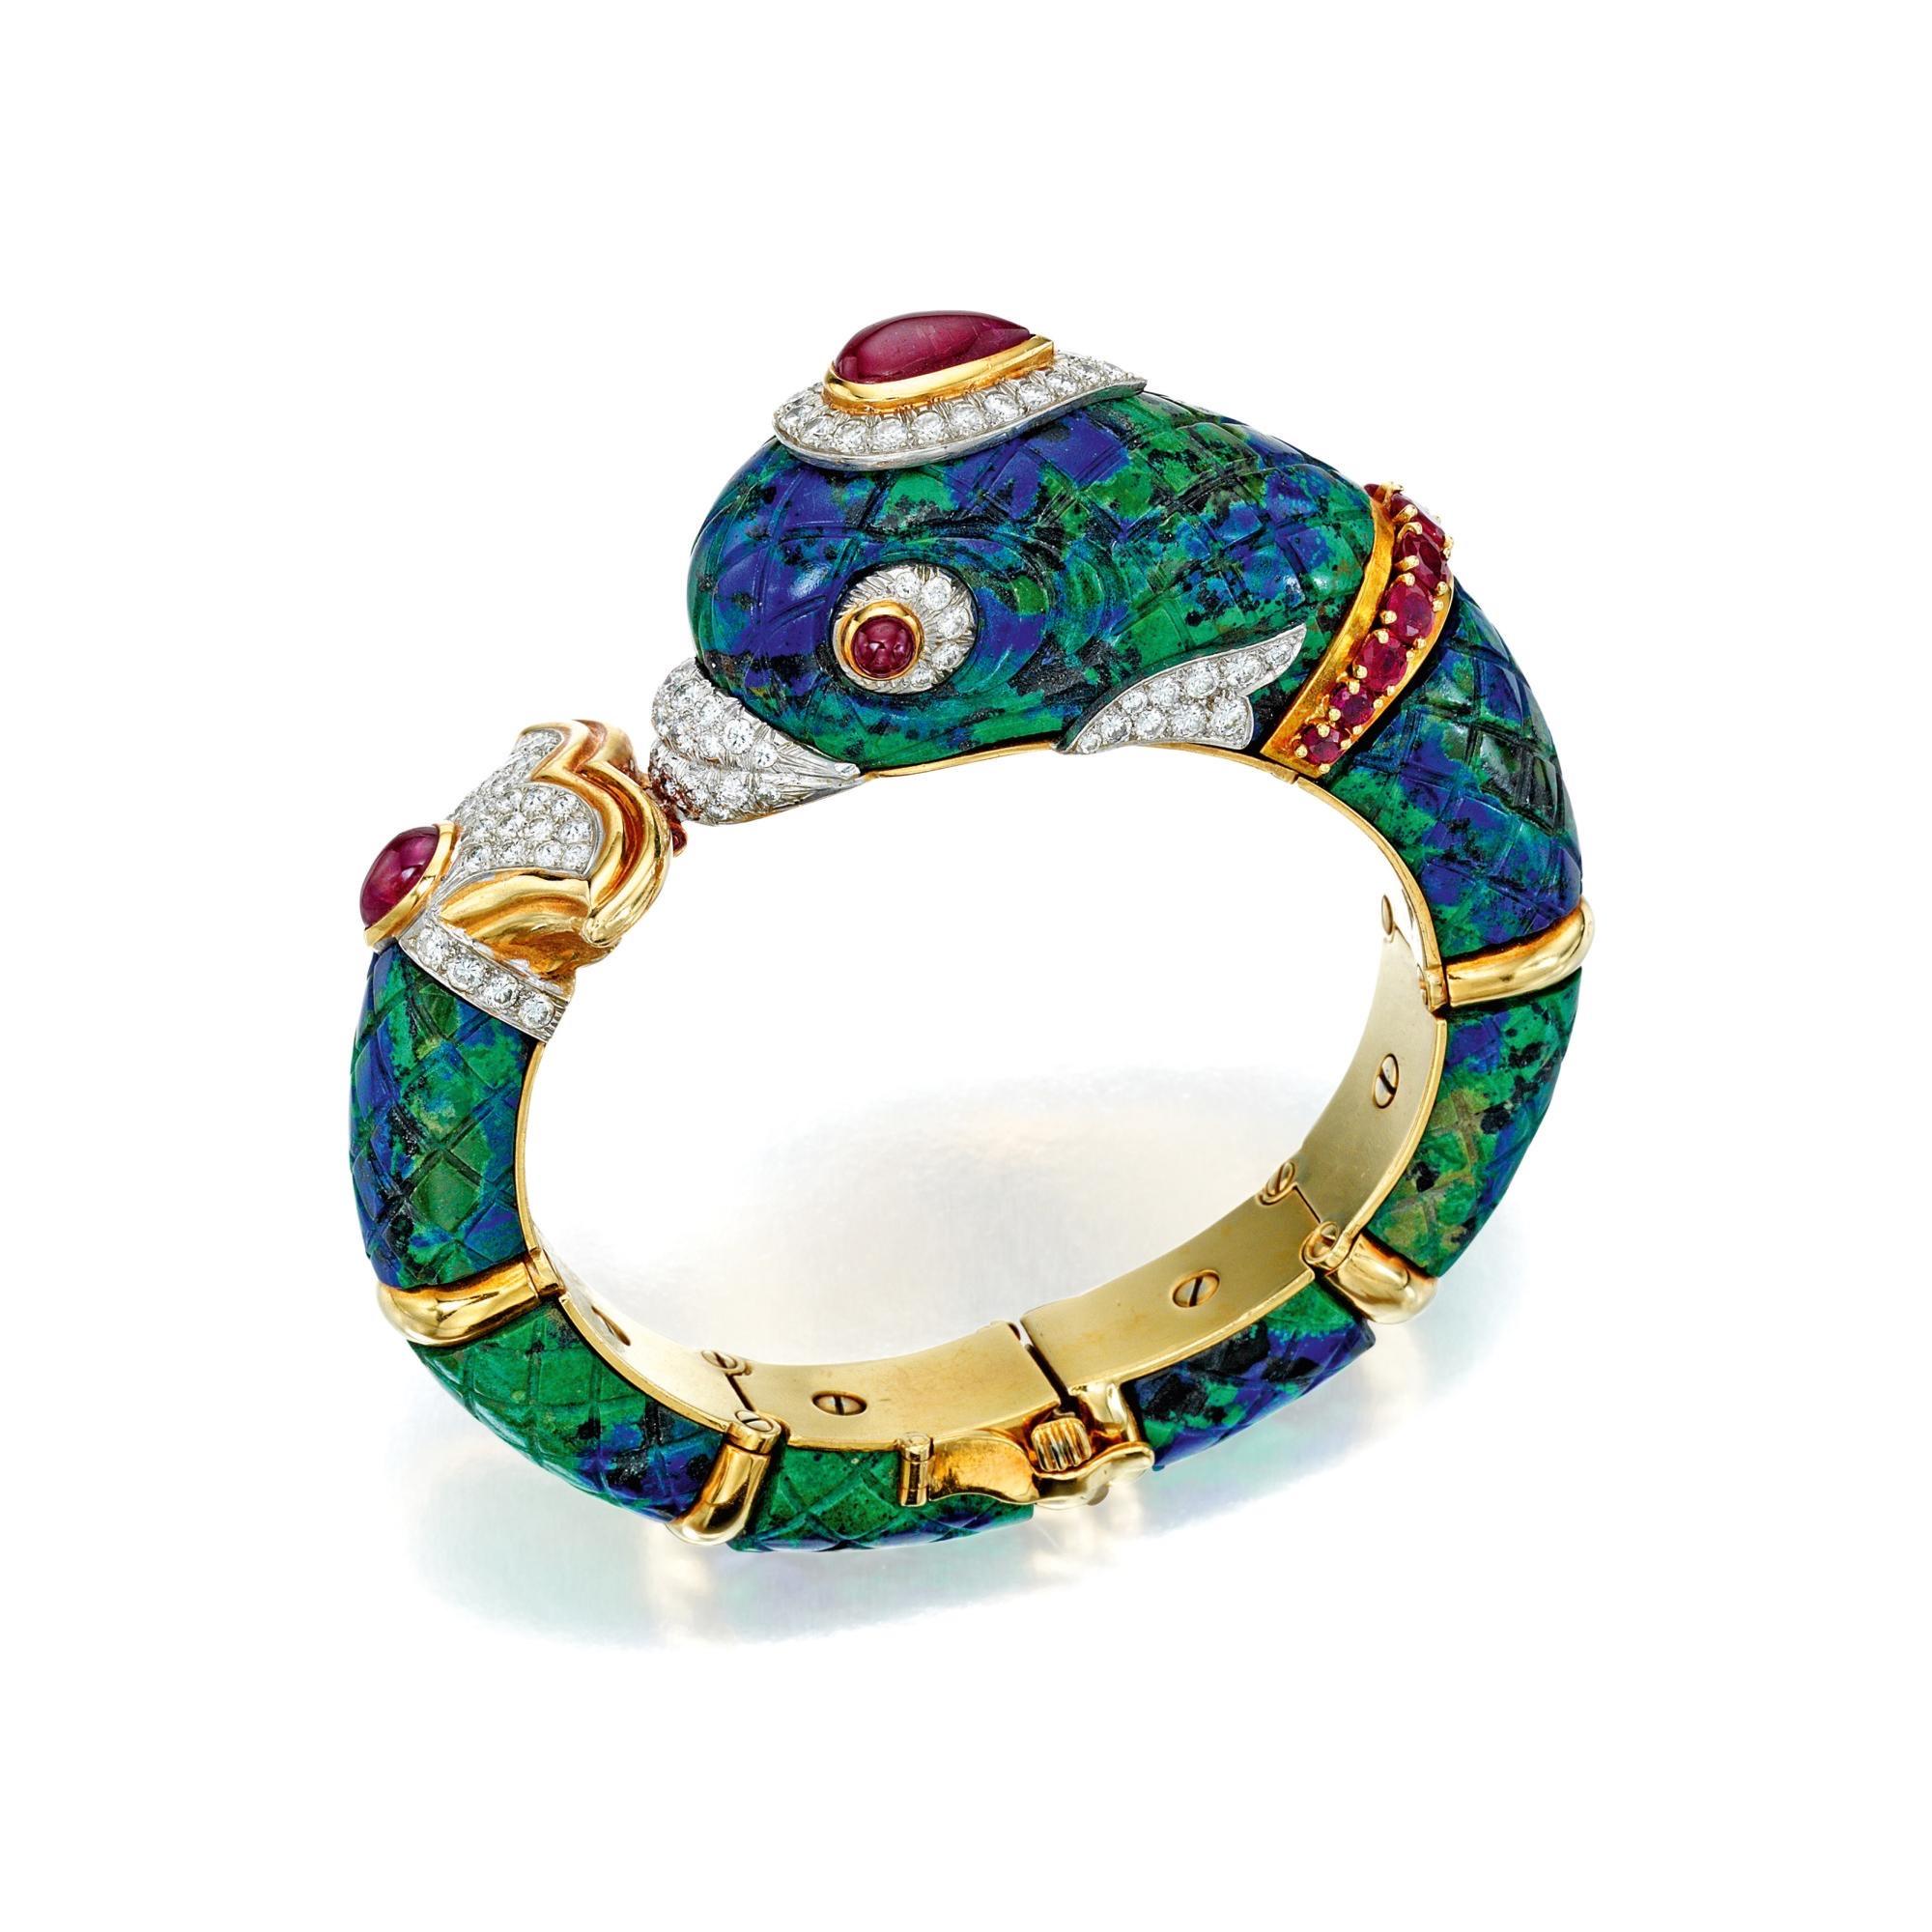 An important David Webb dolphin bracelet composed of carved azurmalachite segments, accented with round diamonds, further decorated with cabochon and round rubies. Internal circumference 6 inches, width 3/4 inches, gross weight approximately 84